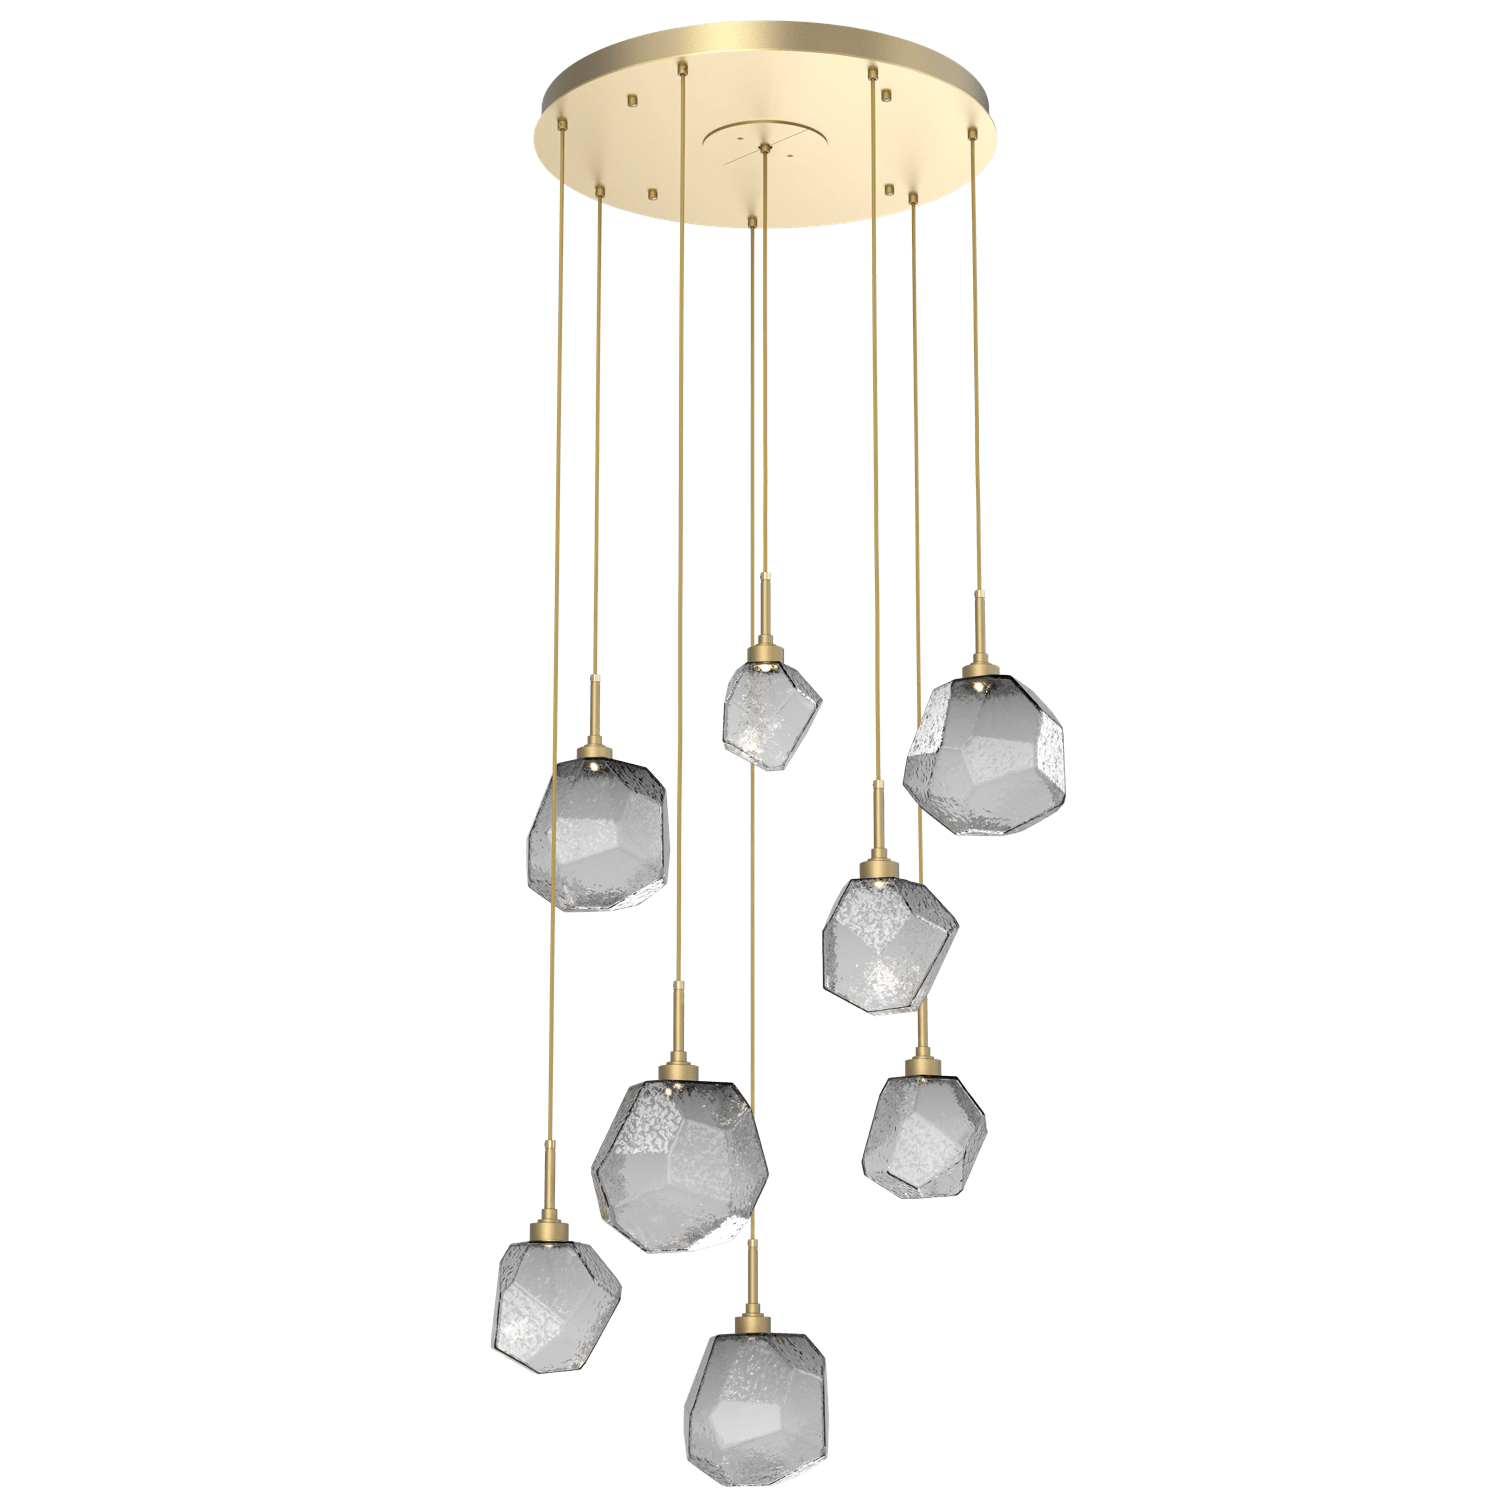 CHB0039-08-GB-S-Hammerton-Studio-Gem-8-light-round-pendant-chandelier-with-gilded-brass-finish-and-smoke-blown-glass-shades-and-LED-lamping